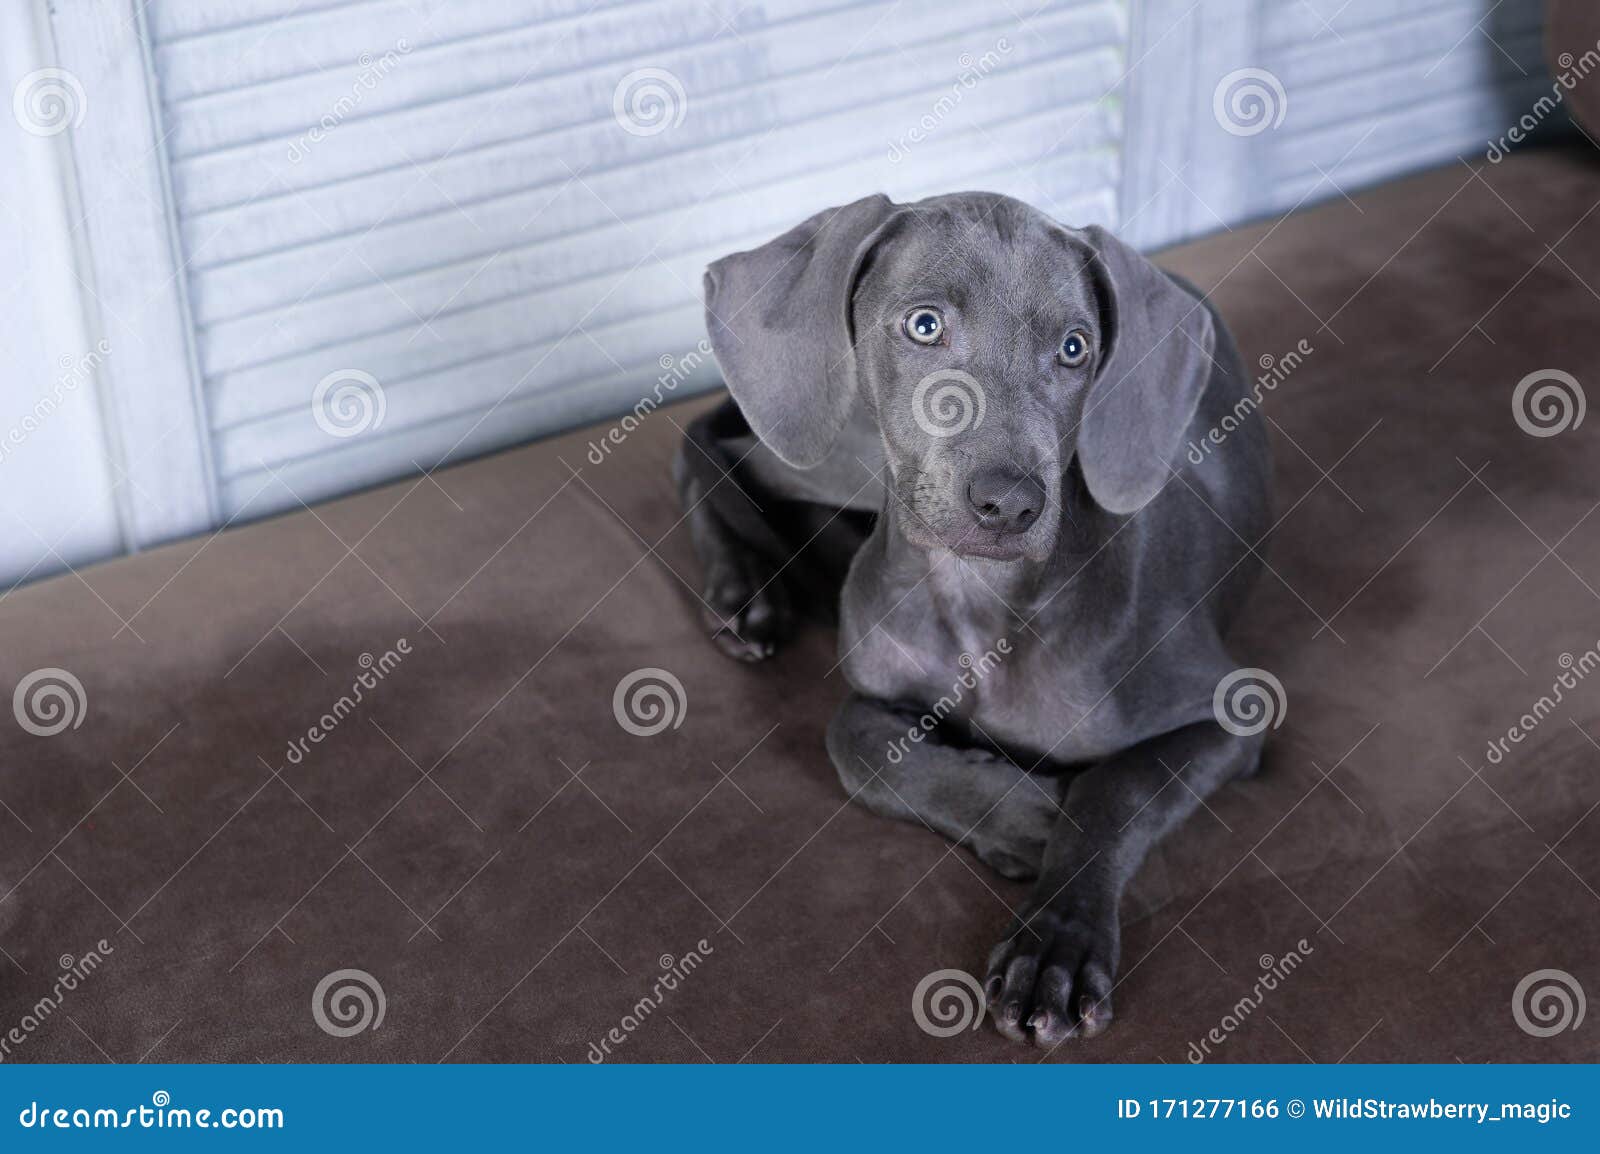 Very Beautiful Dog Blue Weimaraner Breed Space For Text Luxury Chic Dog Stock Photo Image Of Animal Beauty 171277166